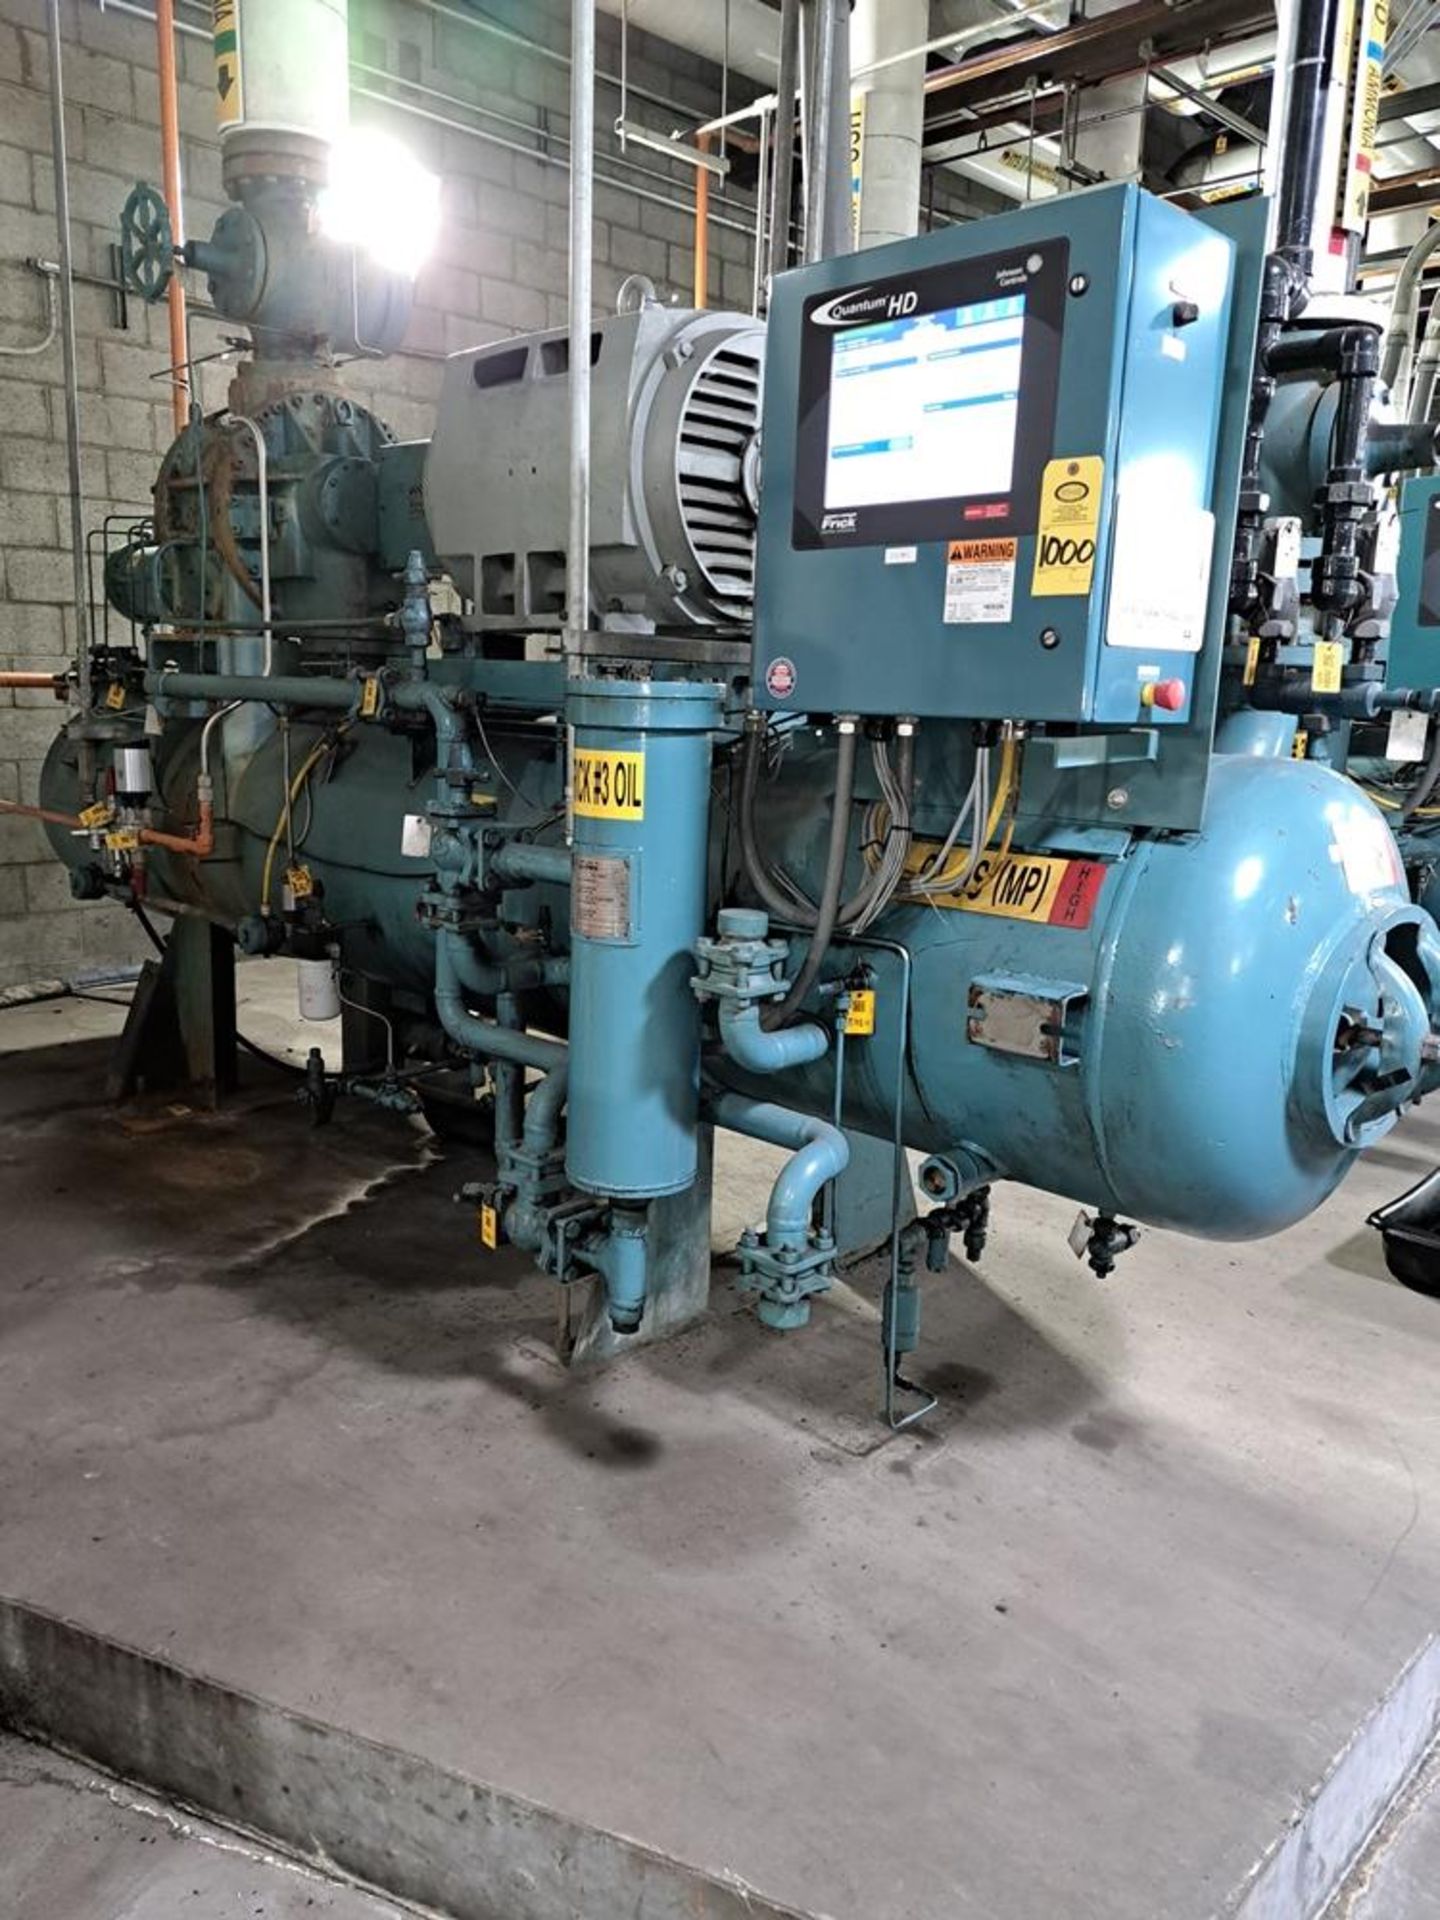 Frick Model RBWII+177H, 400 H.P. Ammonia Rotary Screw Compressor, S/N S0093FFMPLHAA3: Required